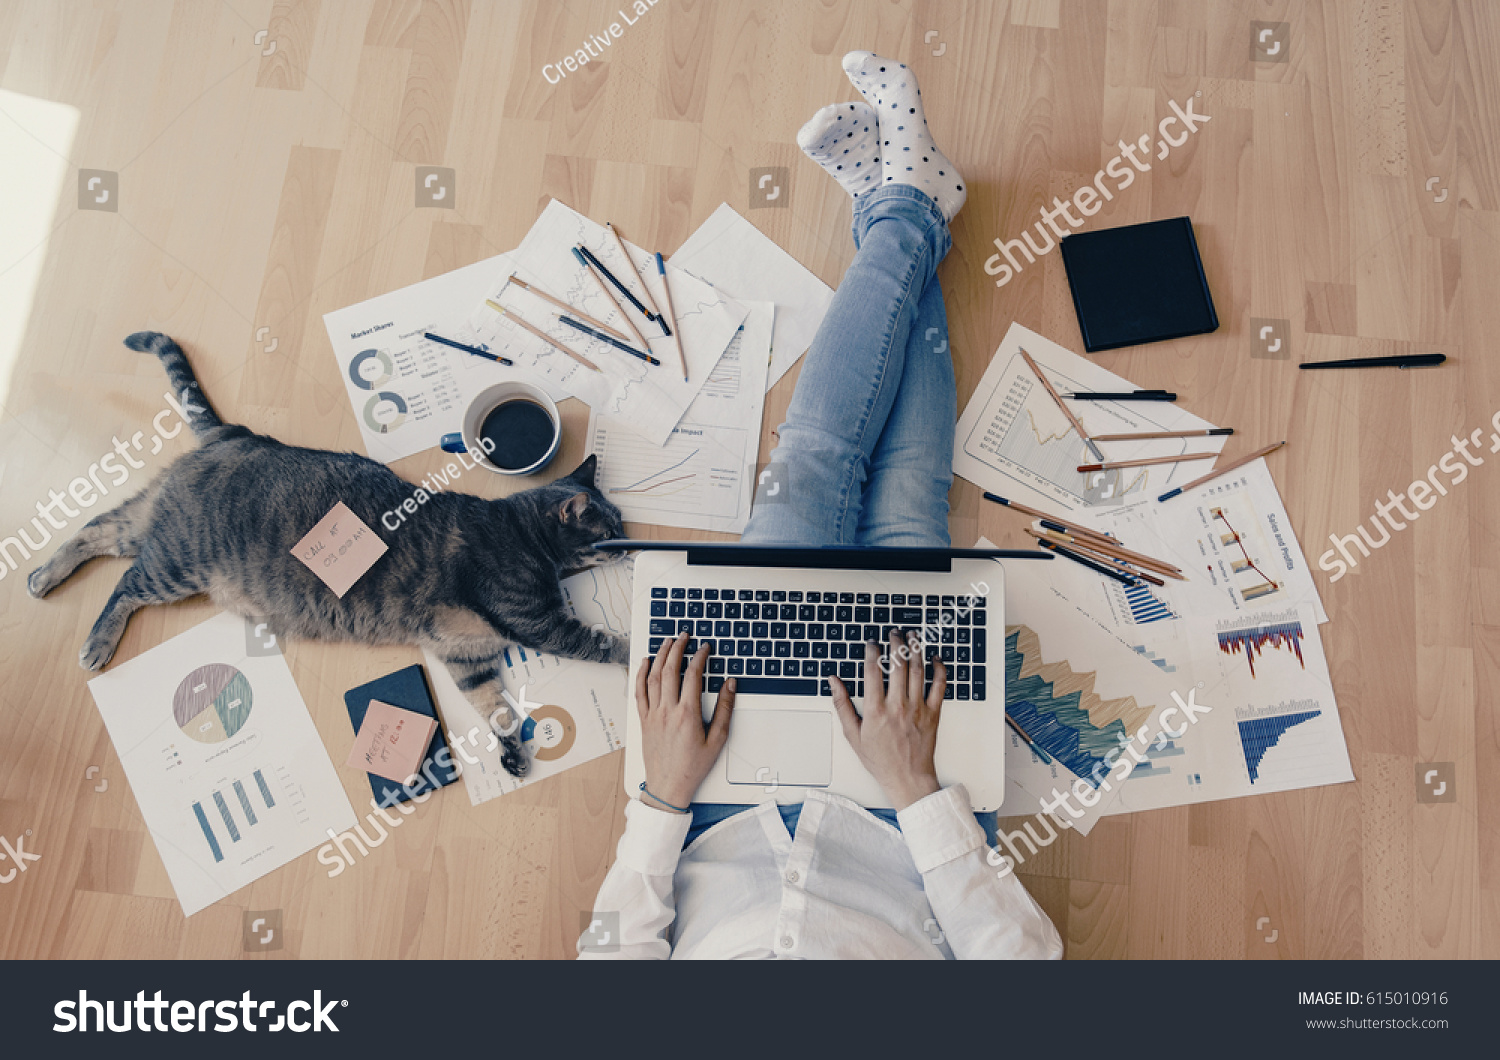 Working home concept - girl with smart phone, laptop and business reports. #615010916